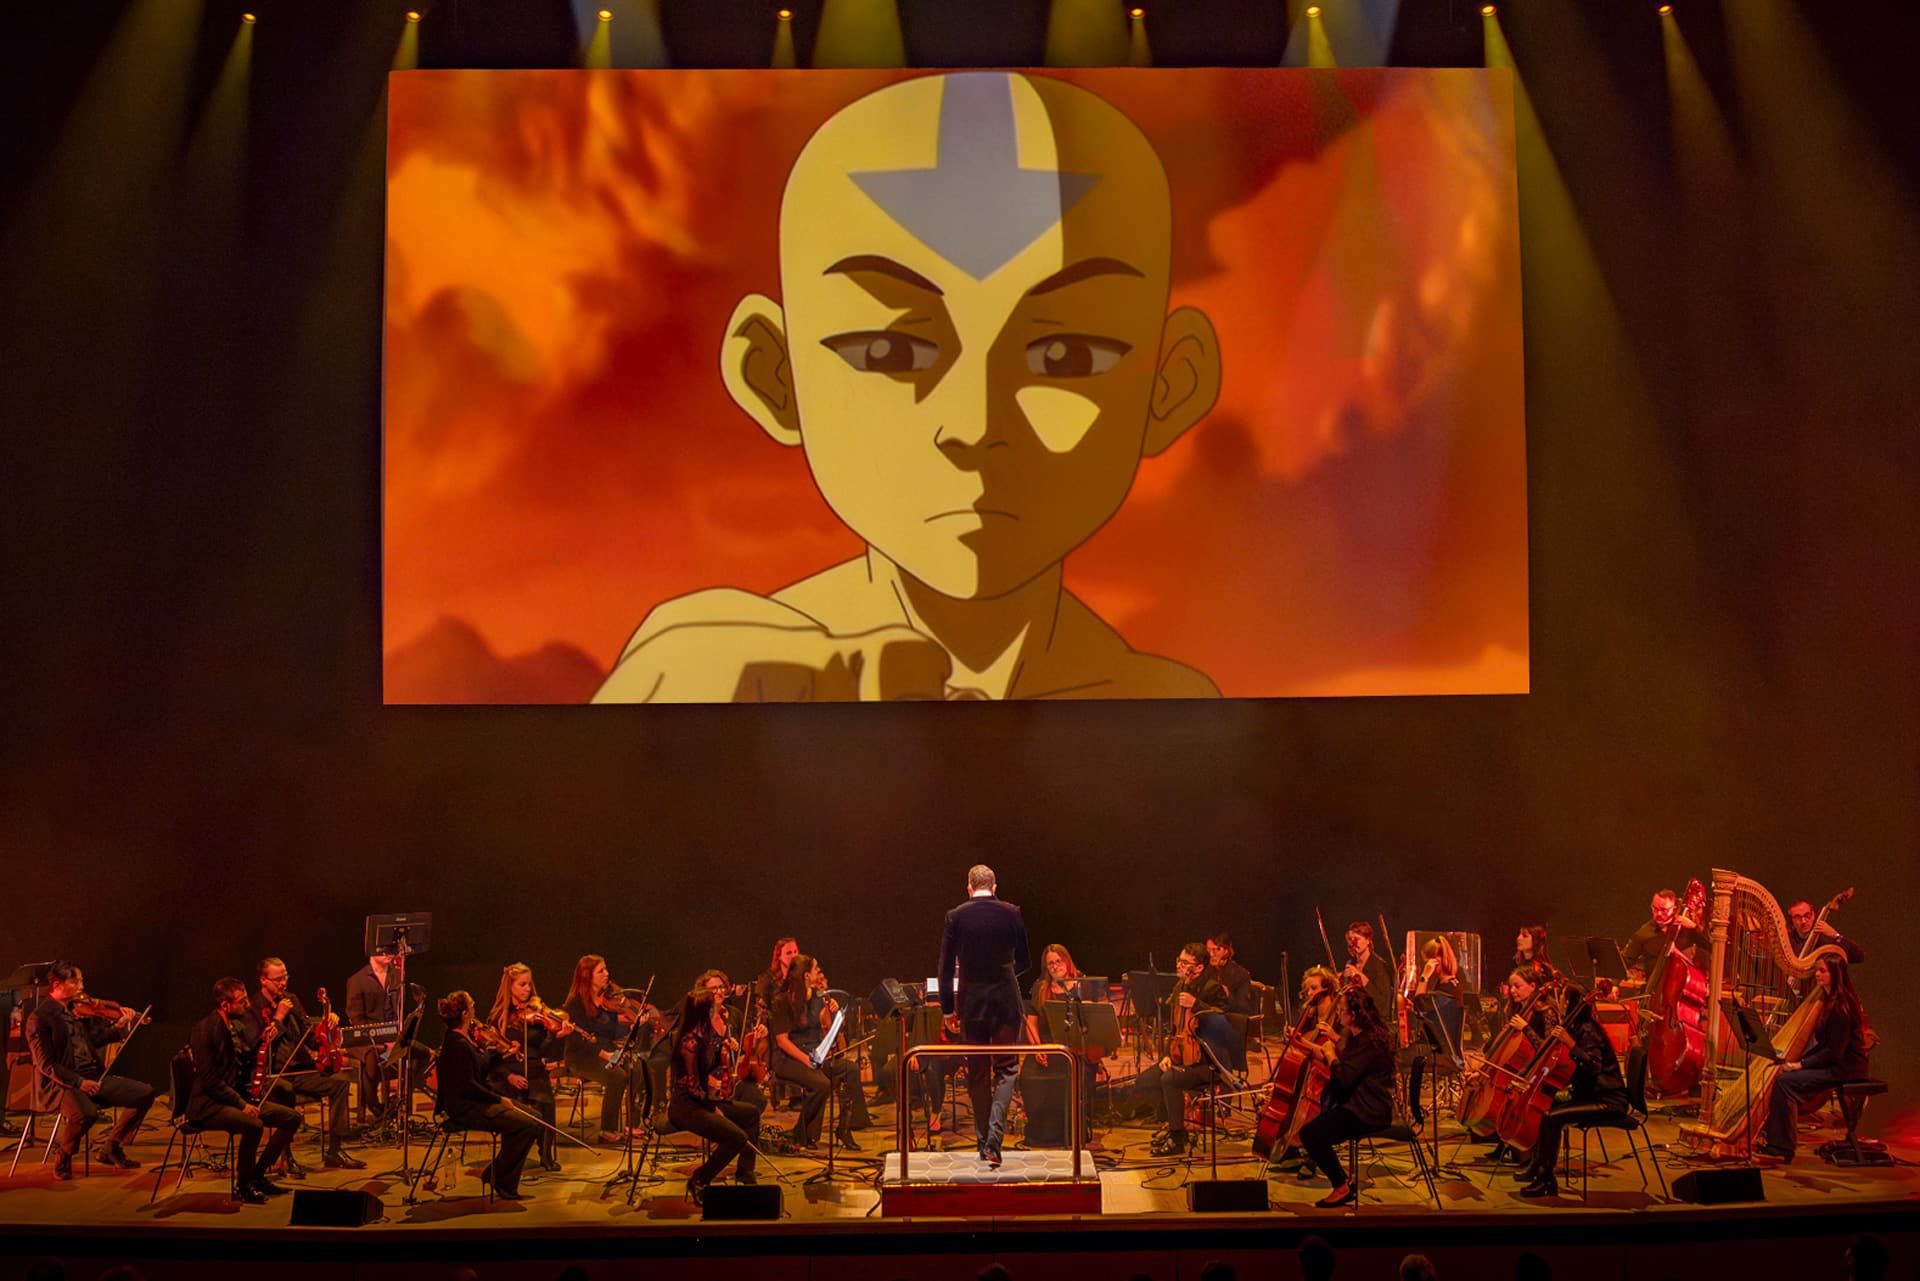 Avatar Concert on stage with orchestra. Large screen playing series